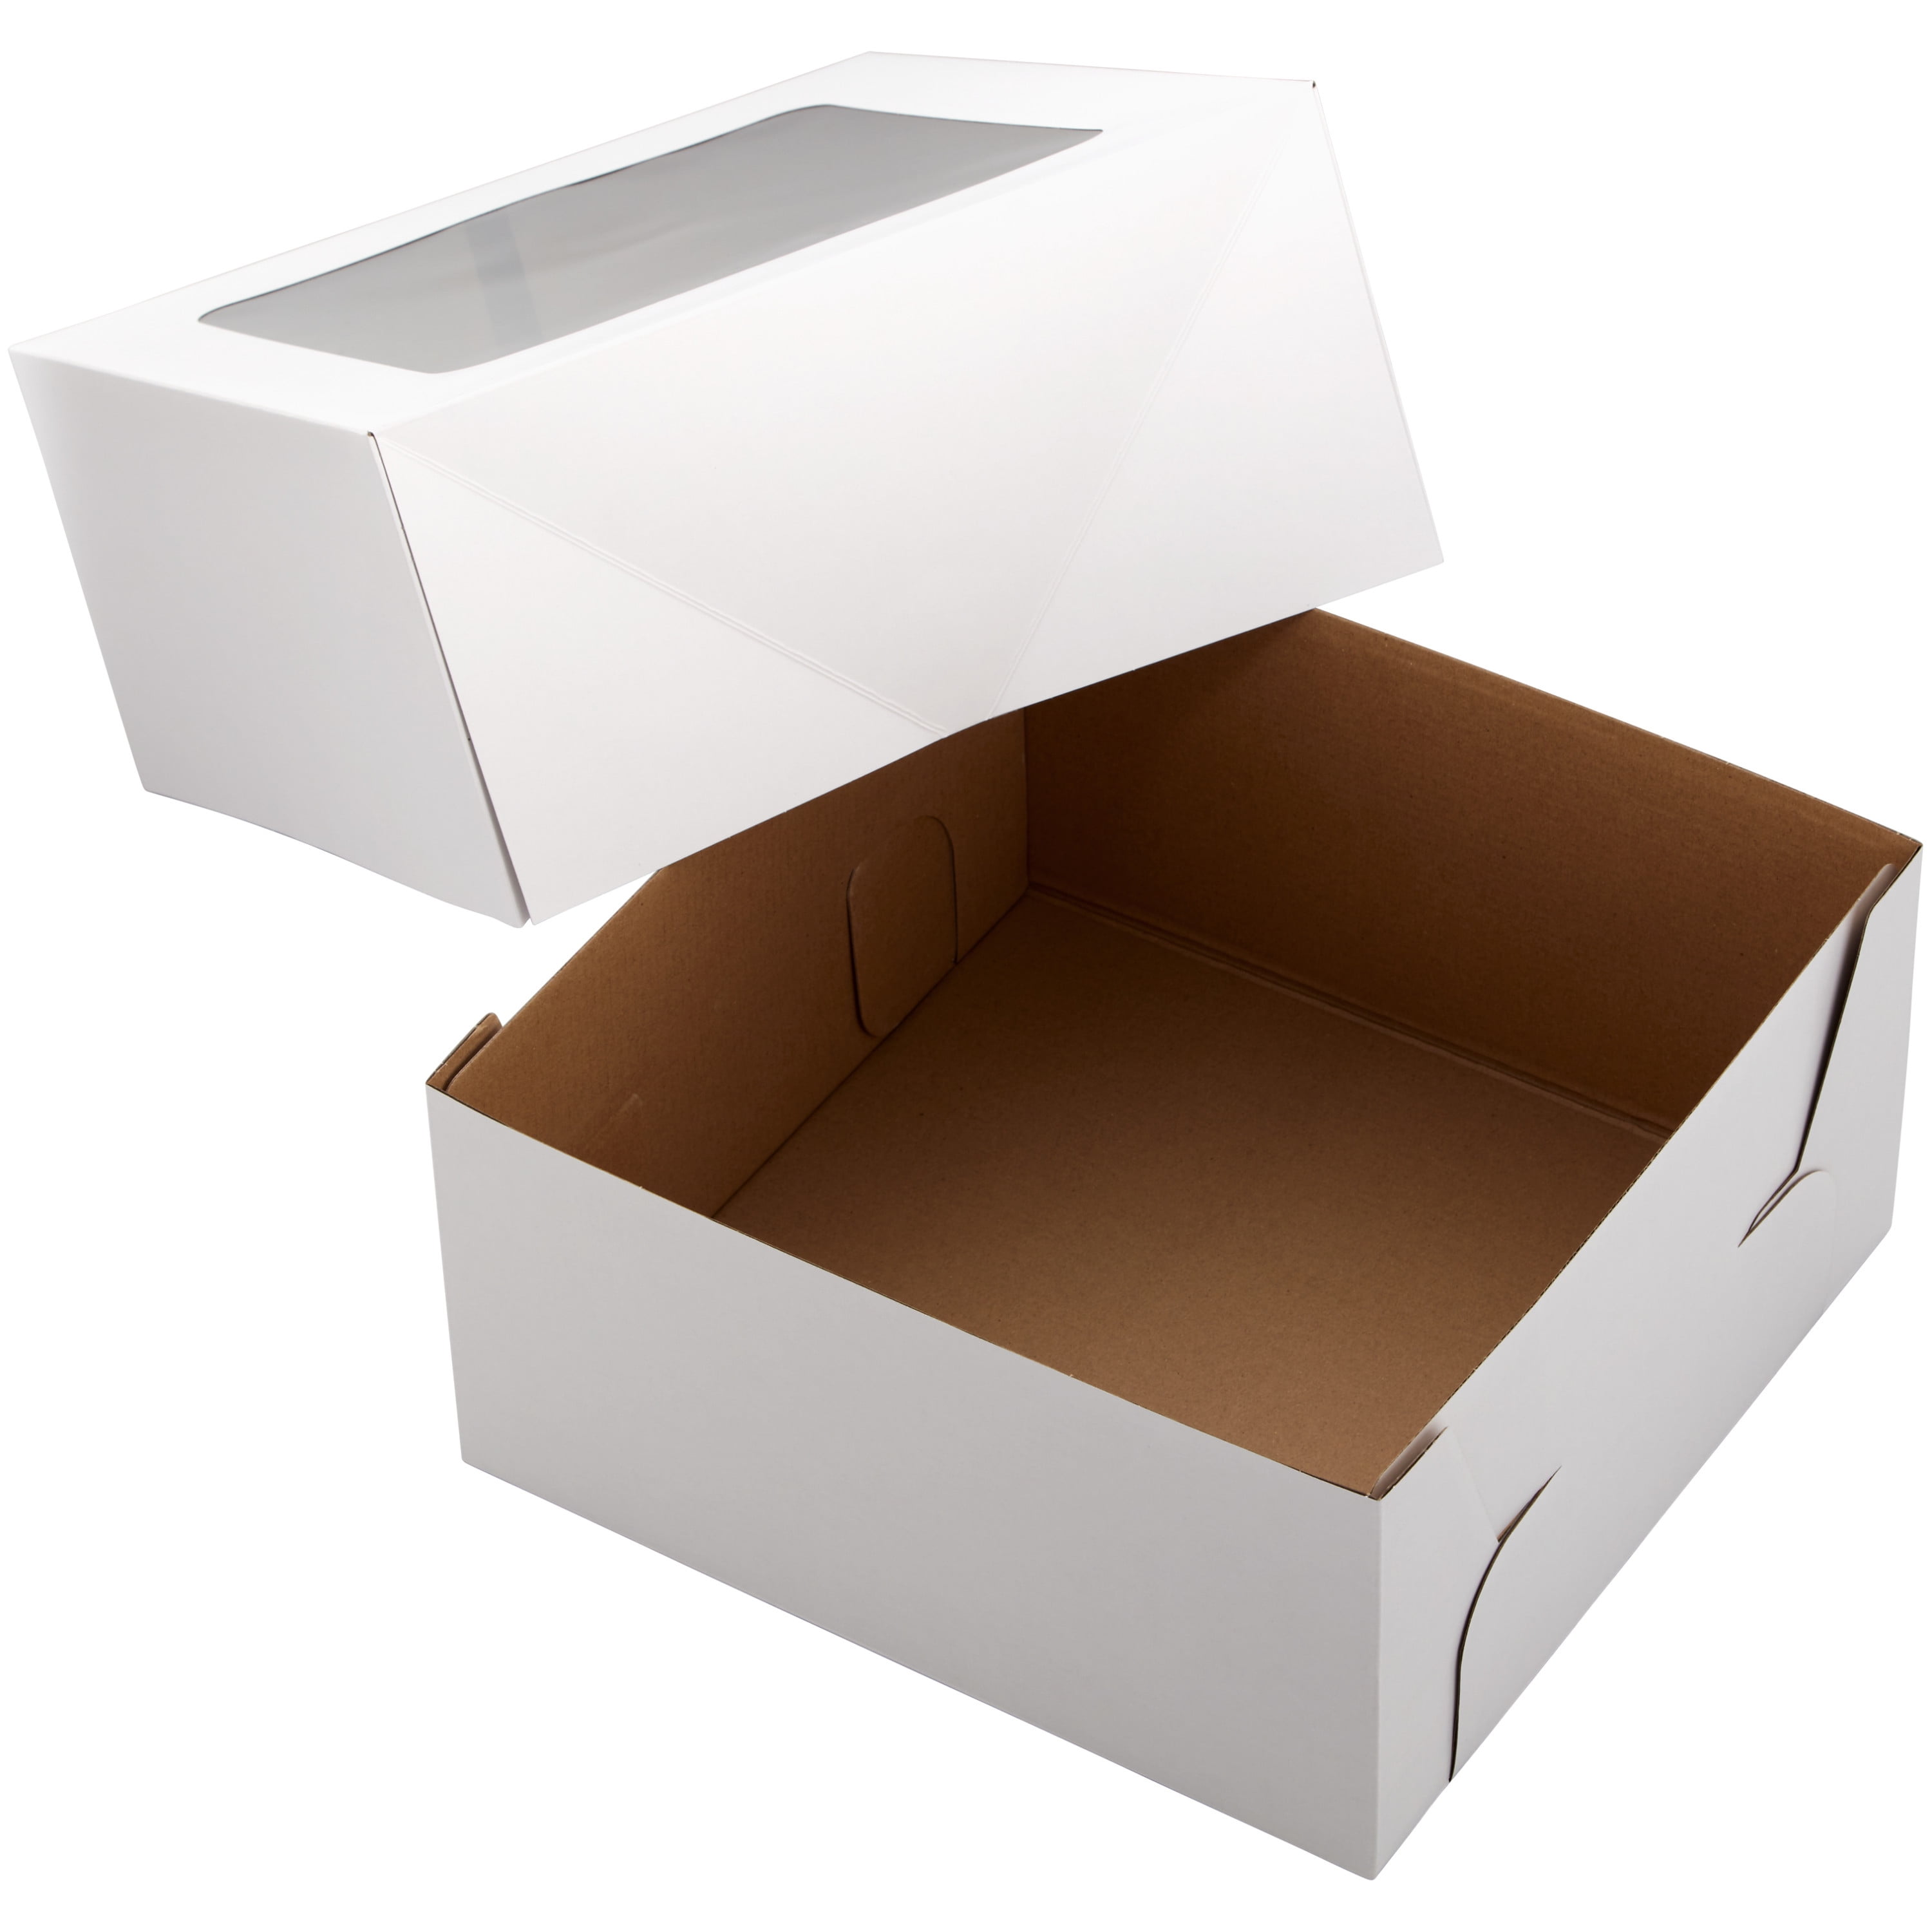 10 count WHITE 8x8x4 Bakery or Cake Box 